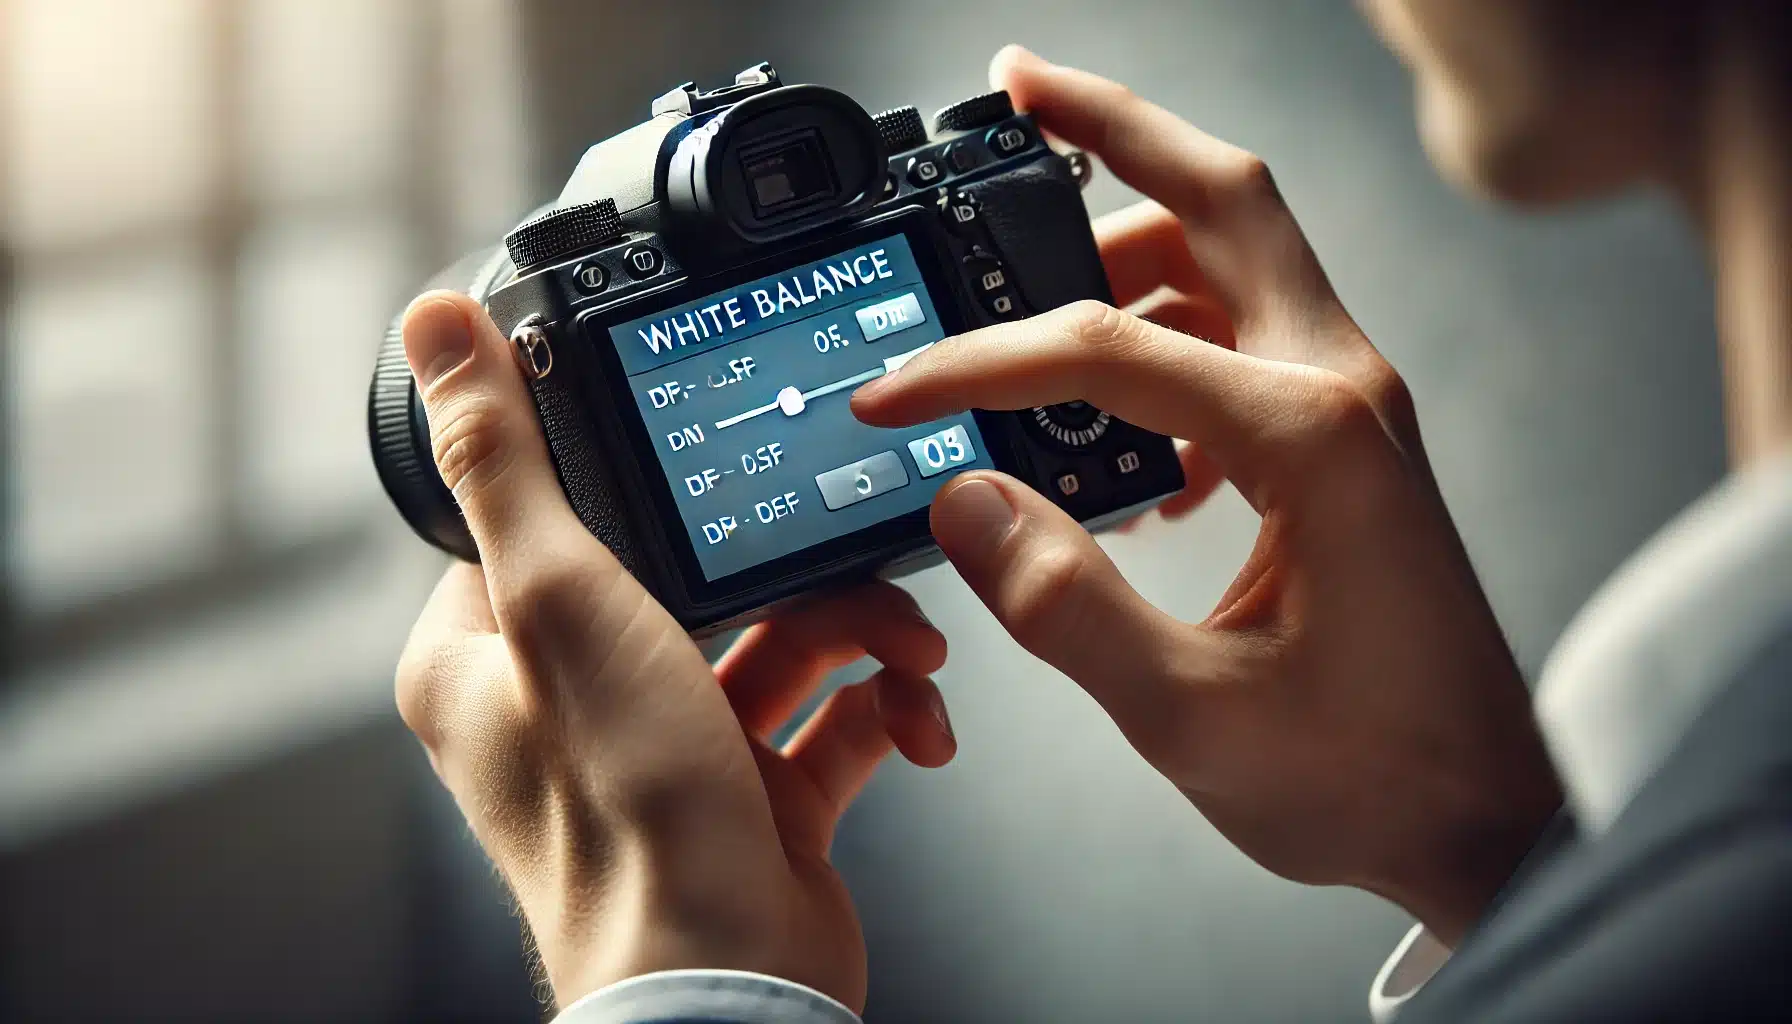 A close-up shot of a person adjusting the white balance settings on a digital camera, with the screen clearly displaying the settings being changed.